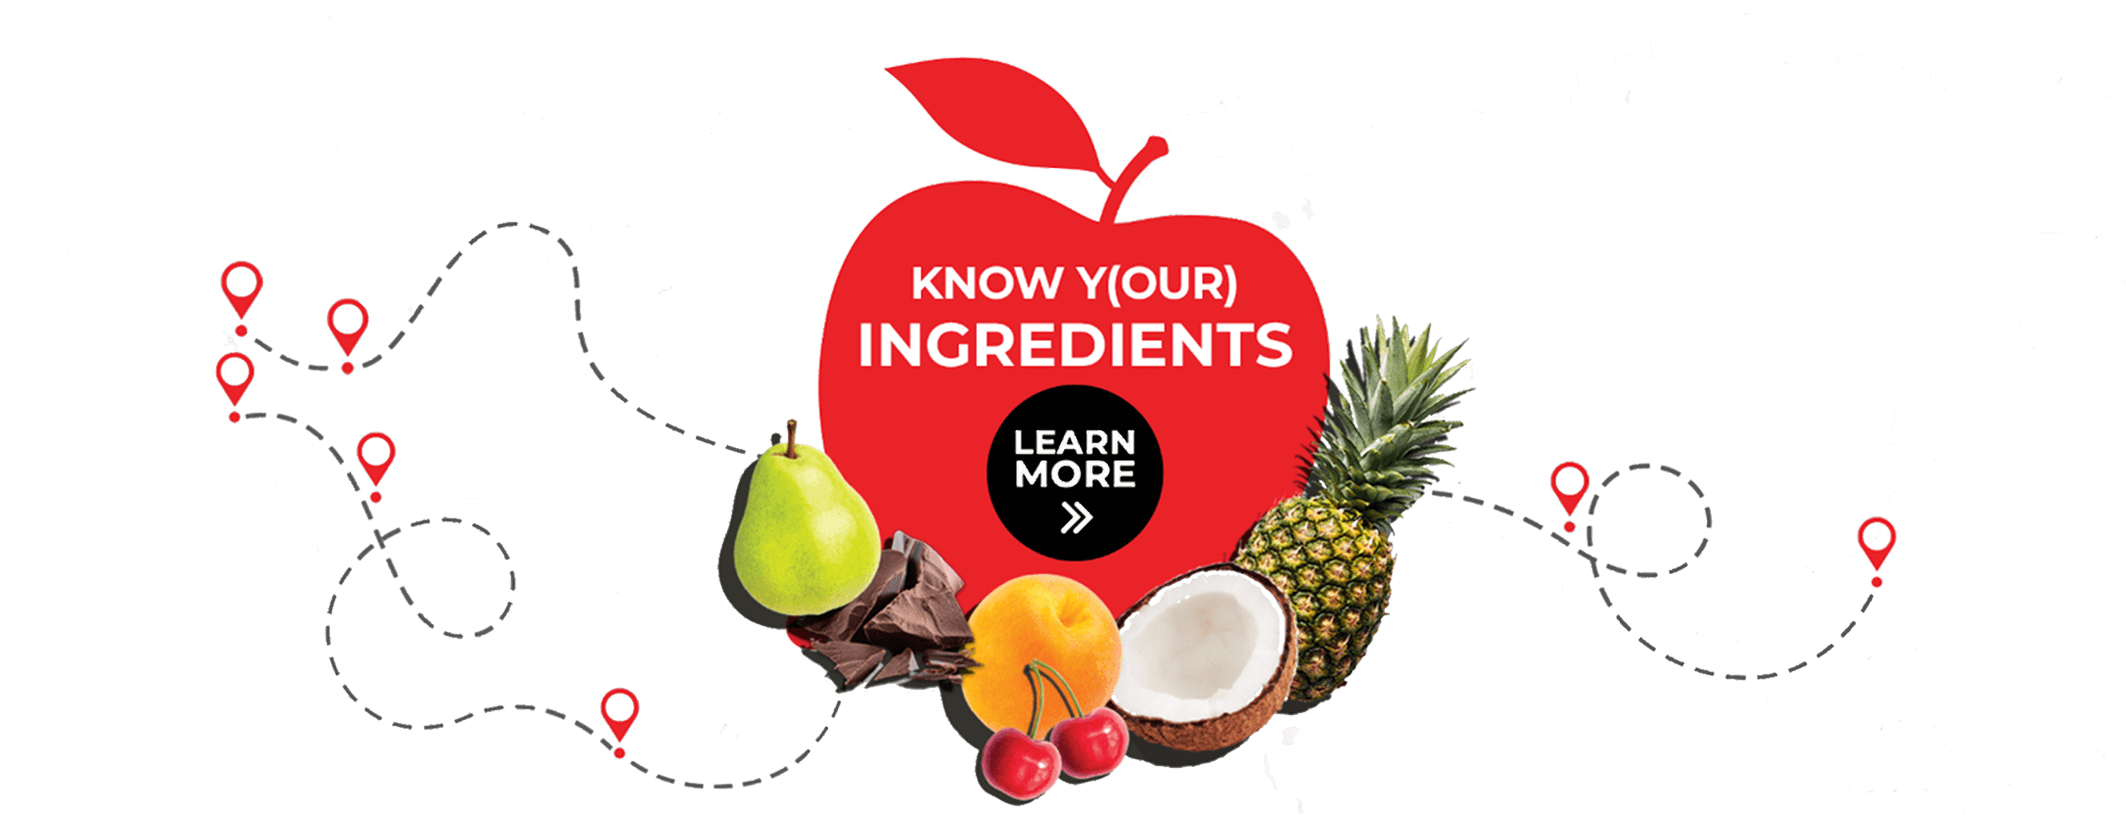 Know Your ingredients image link